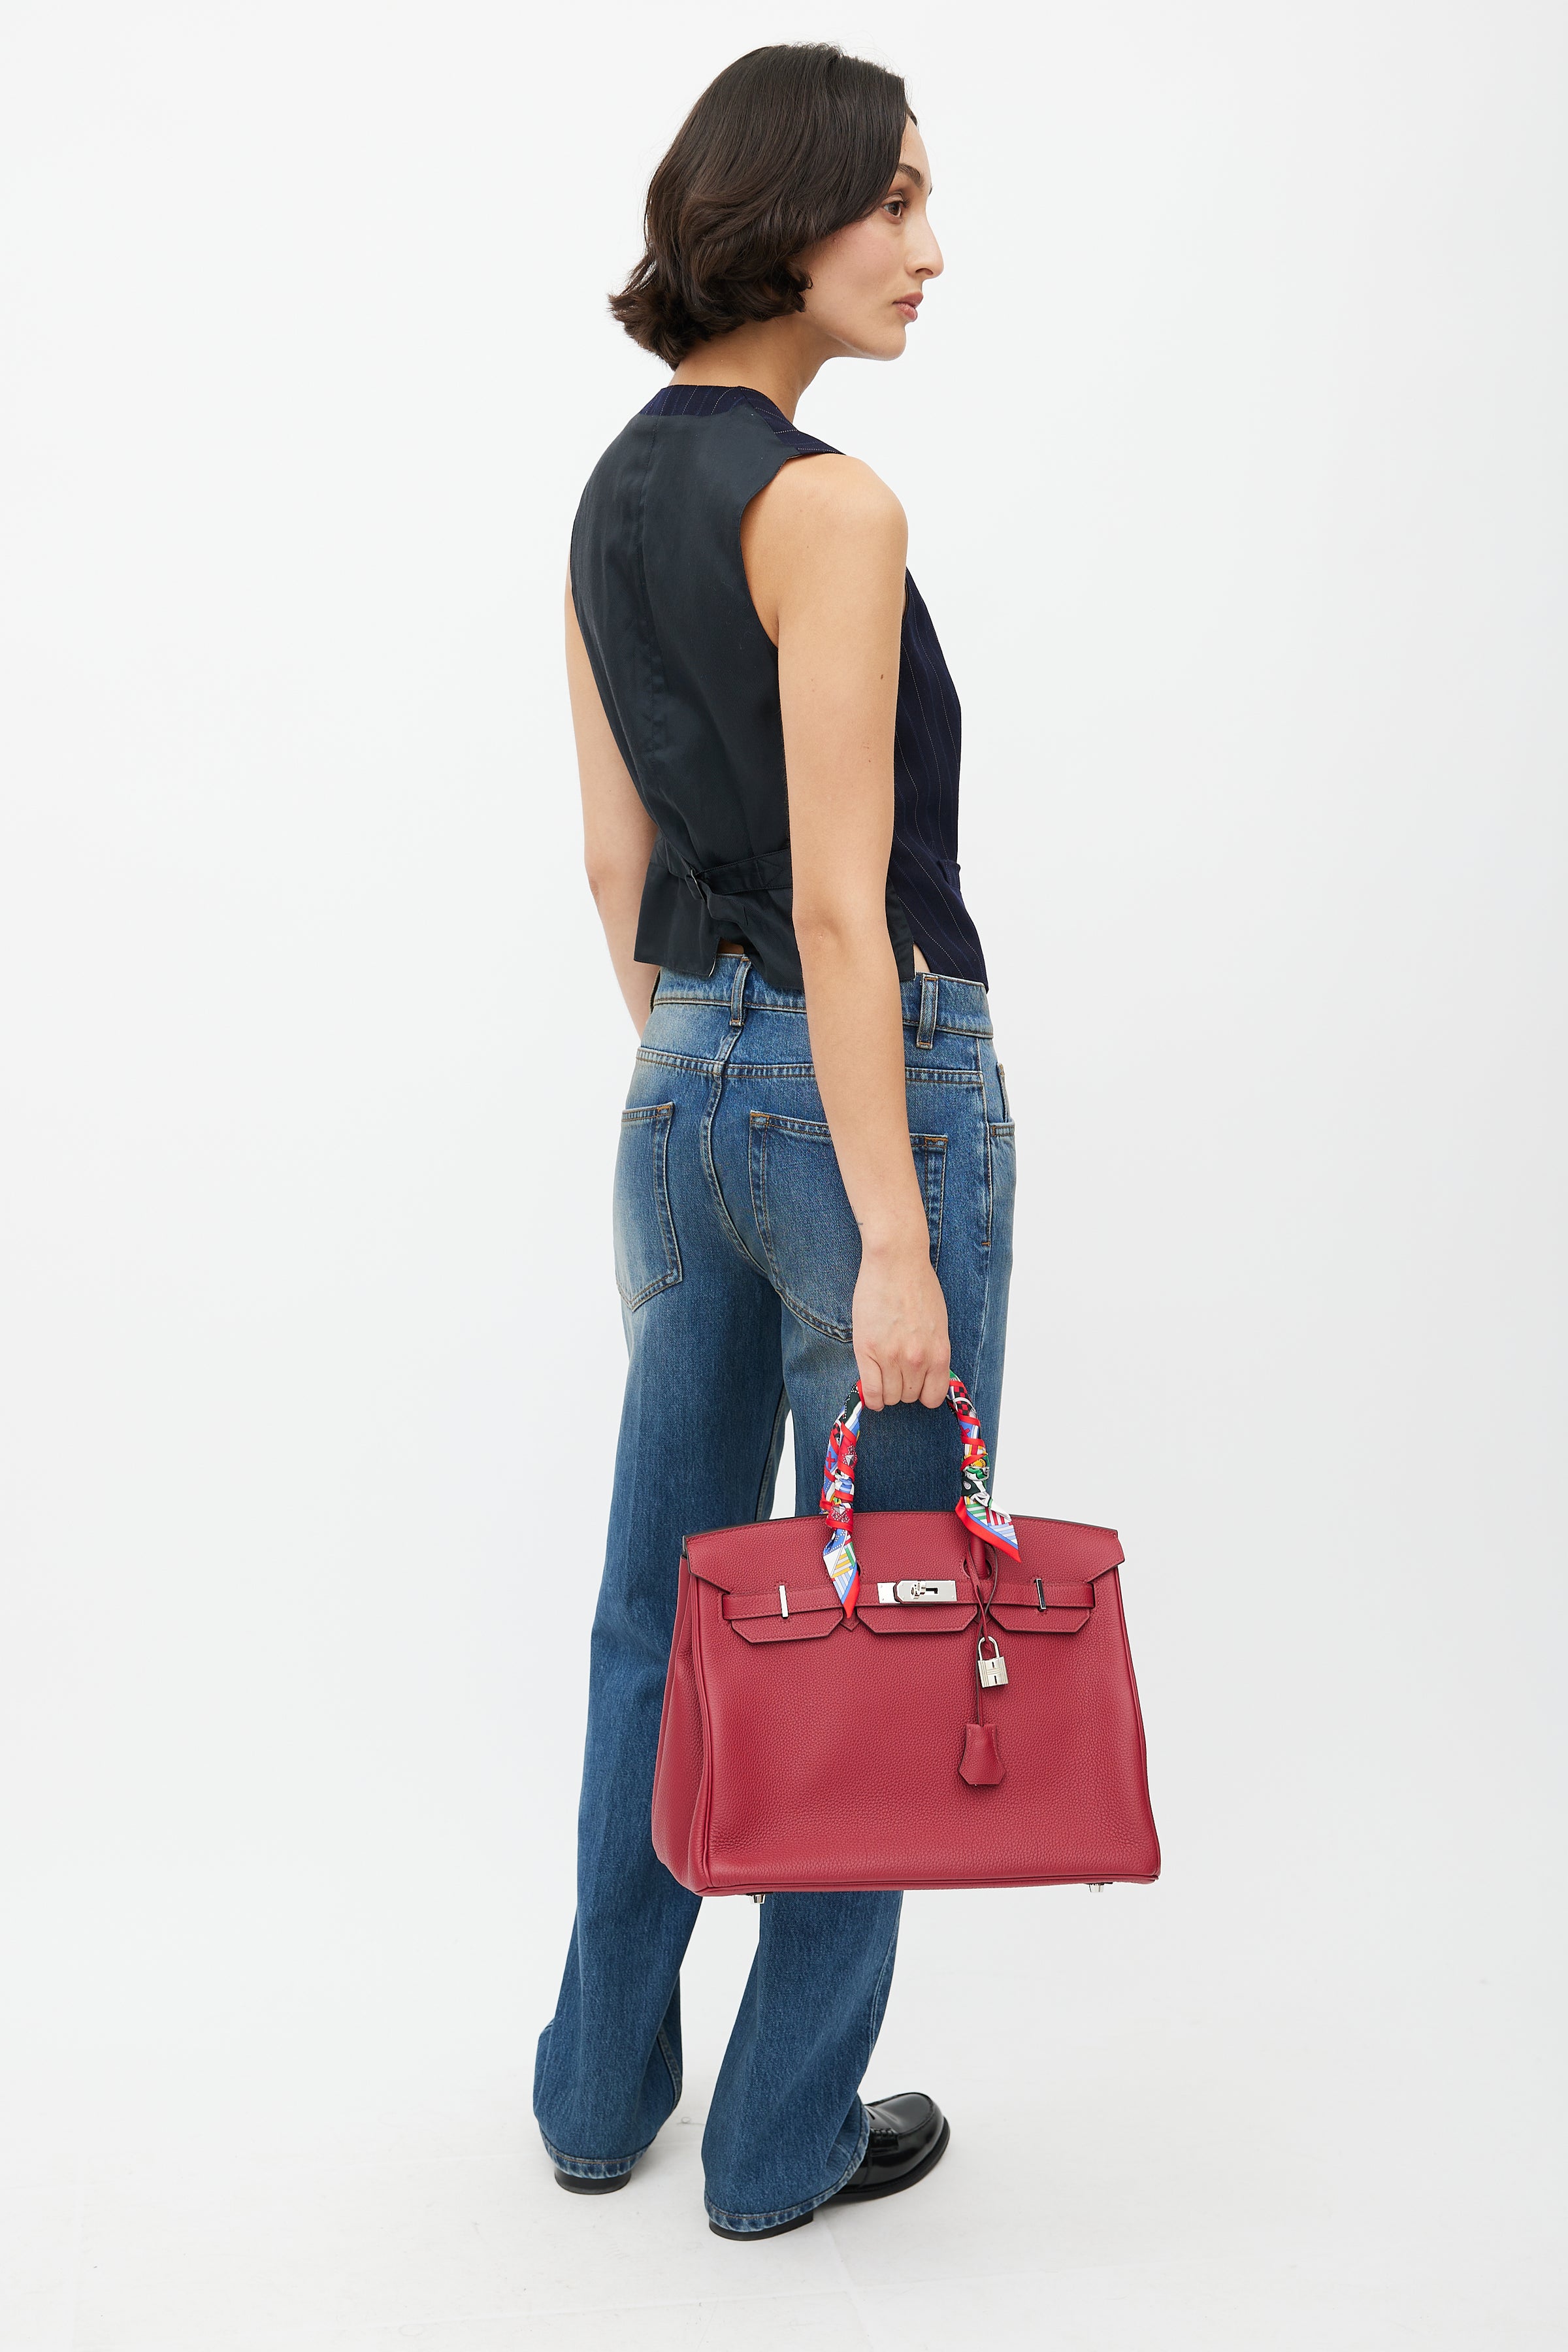 Meet the Rouge Grenat Birkin! This iconic bag is in the color red